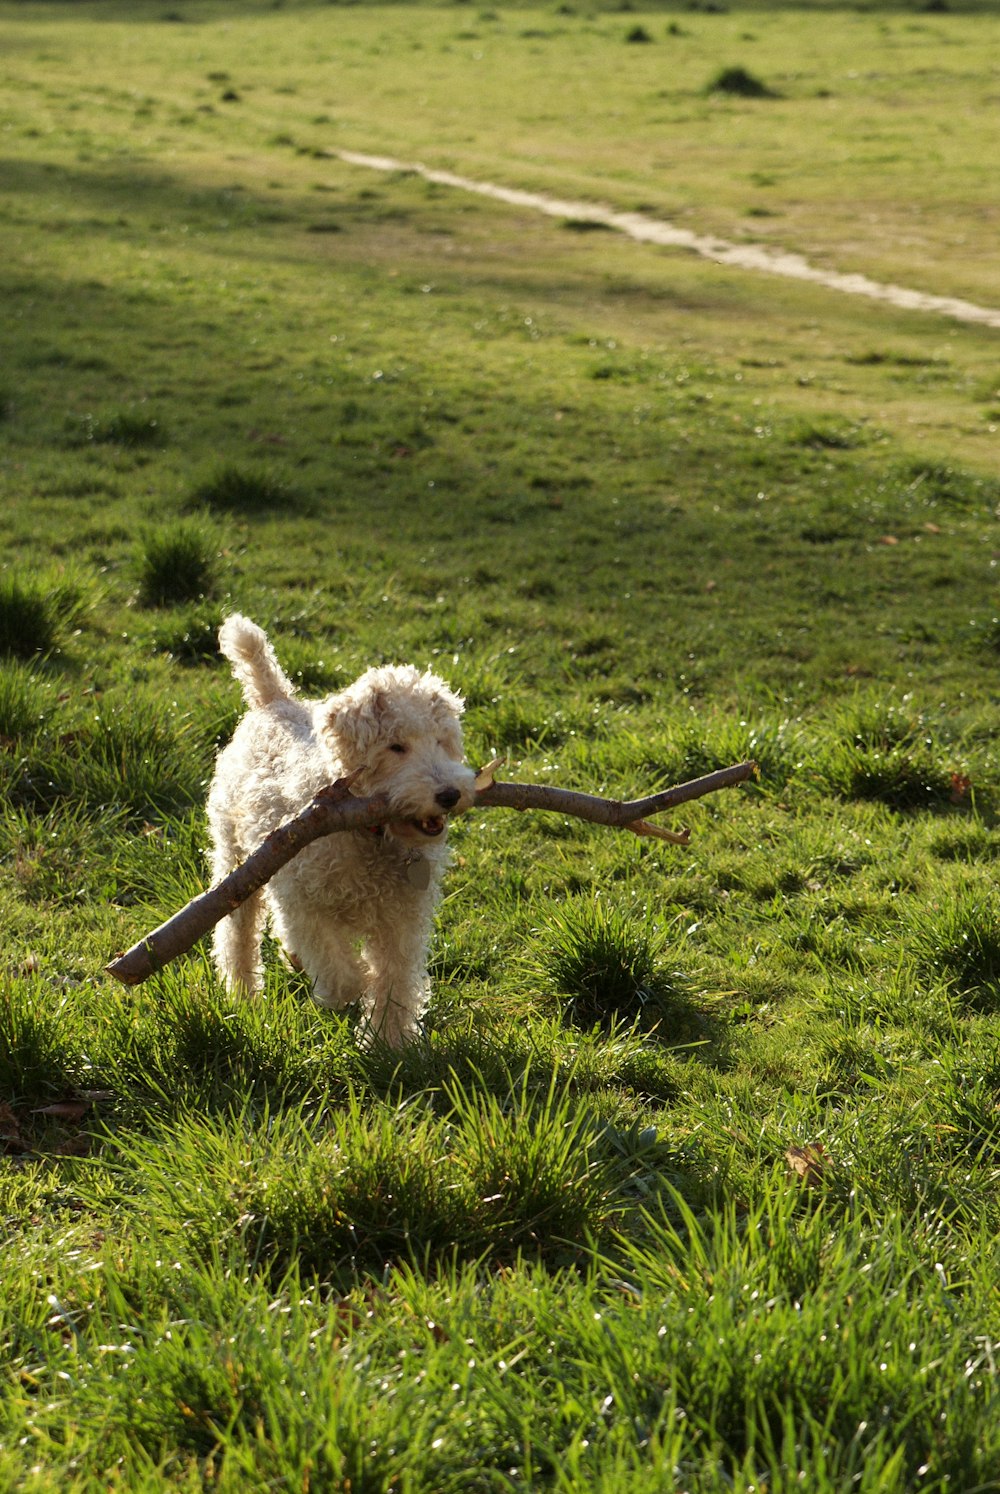 a small white dog carrying a stick in its mouth